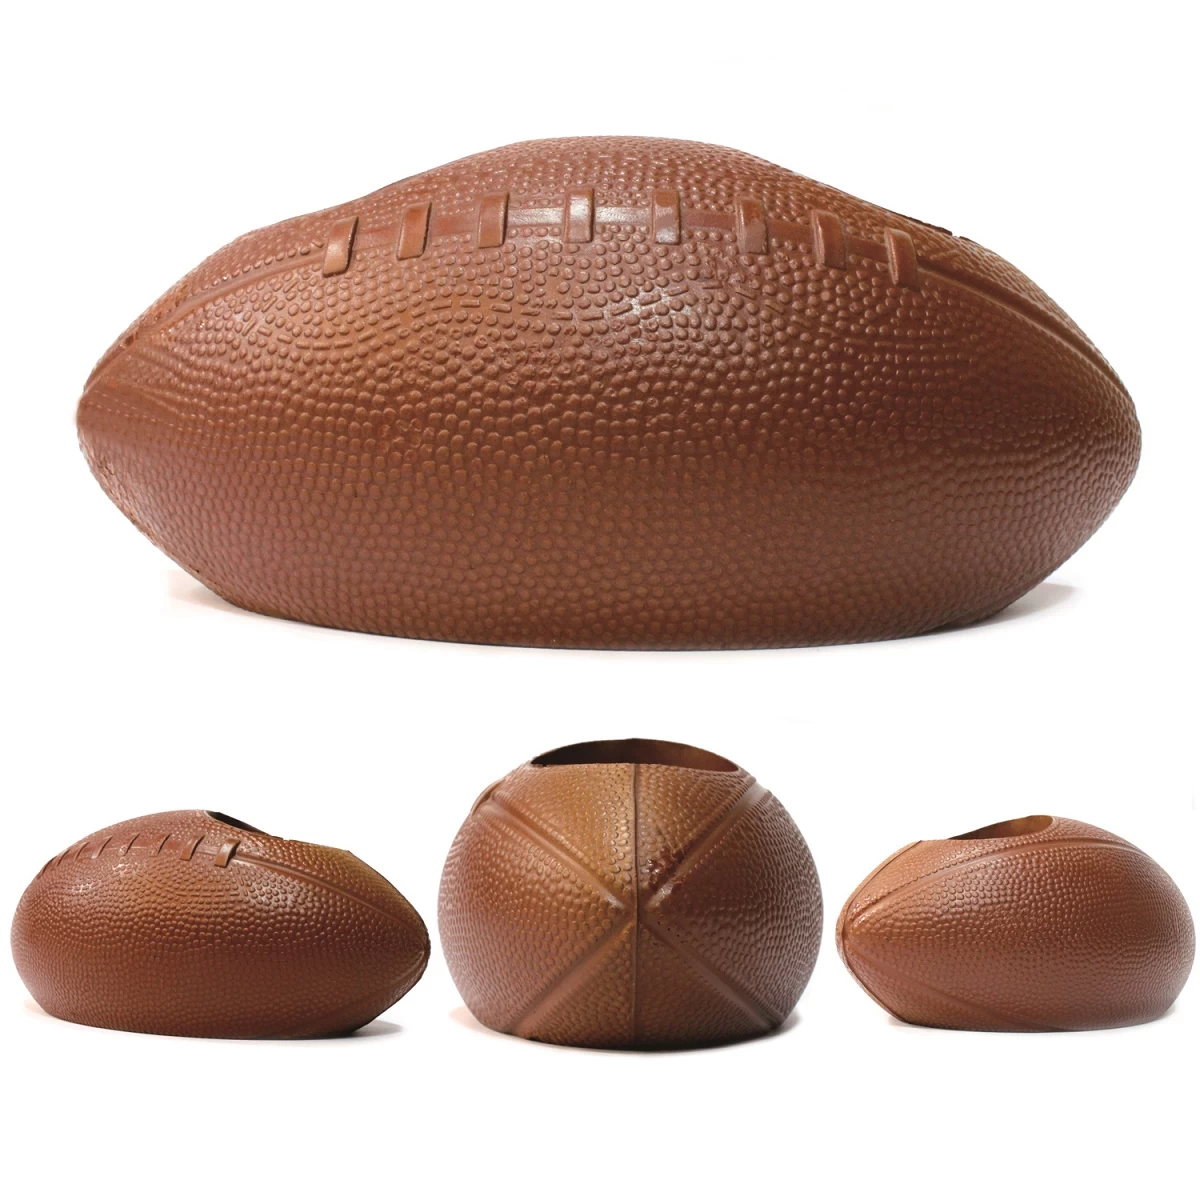 Cina whole sale foam rugby ball,customizable children adult play toys,PU Football article,Rugby Football produttore